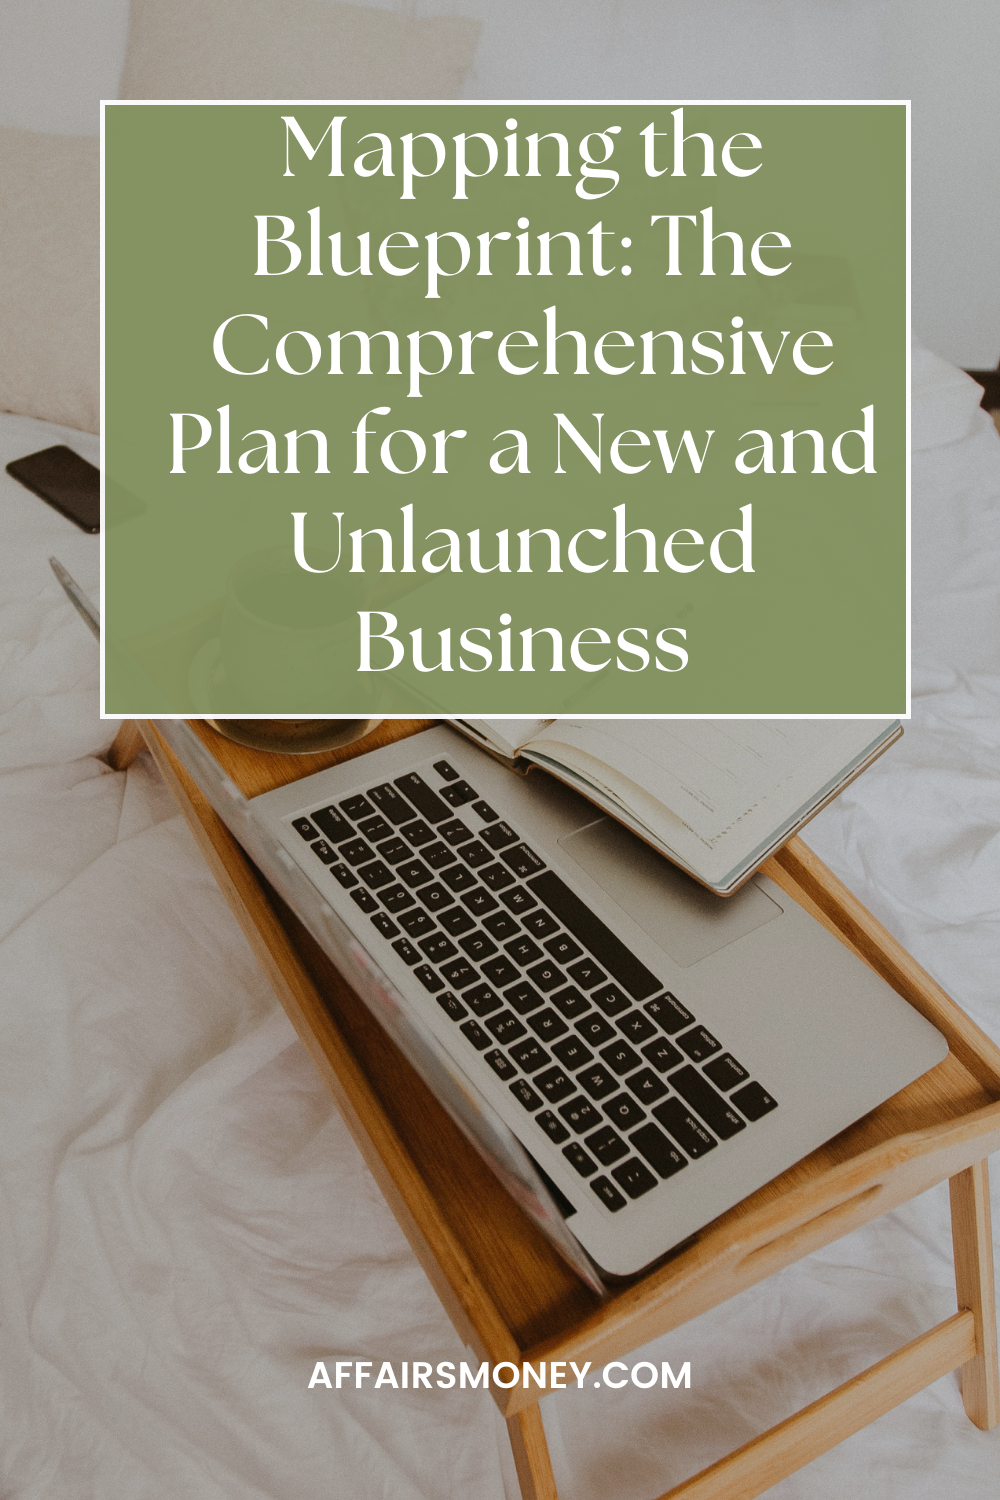 Mapping the Blueprint: The Comprehensive Plan for a New and Unlaunched Business